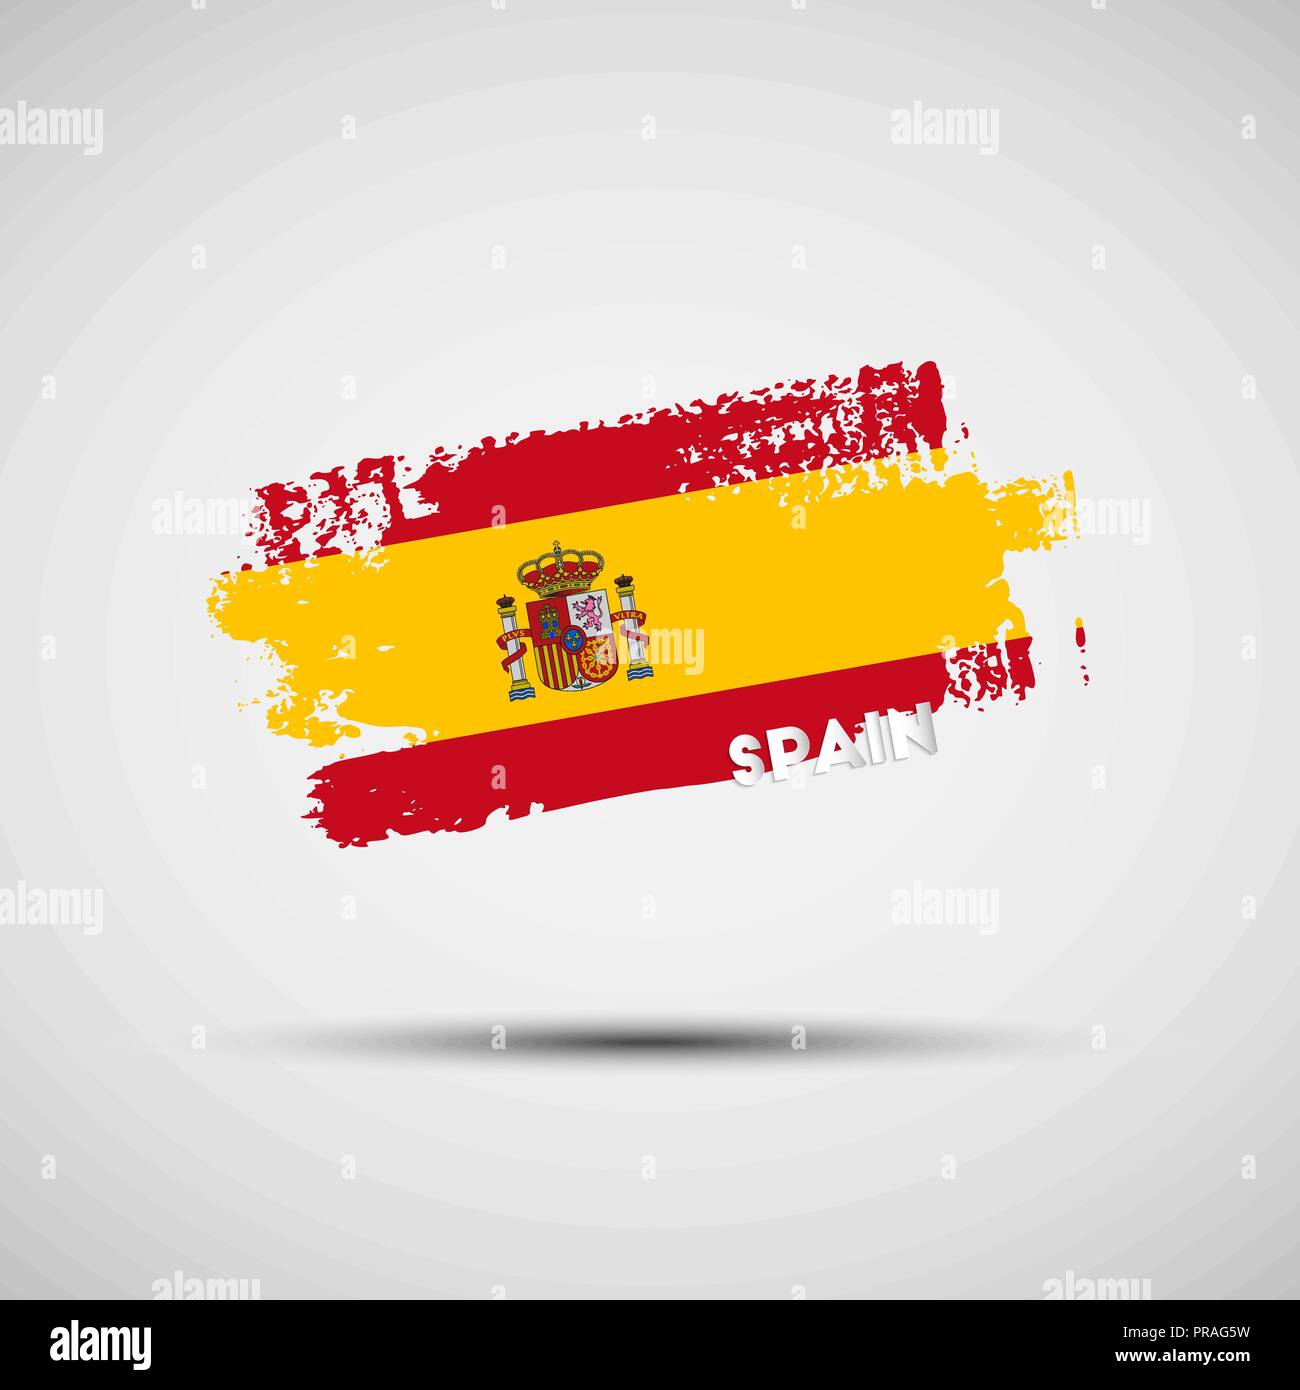 Spain Stock Vector Images - Alamy